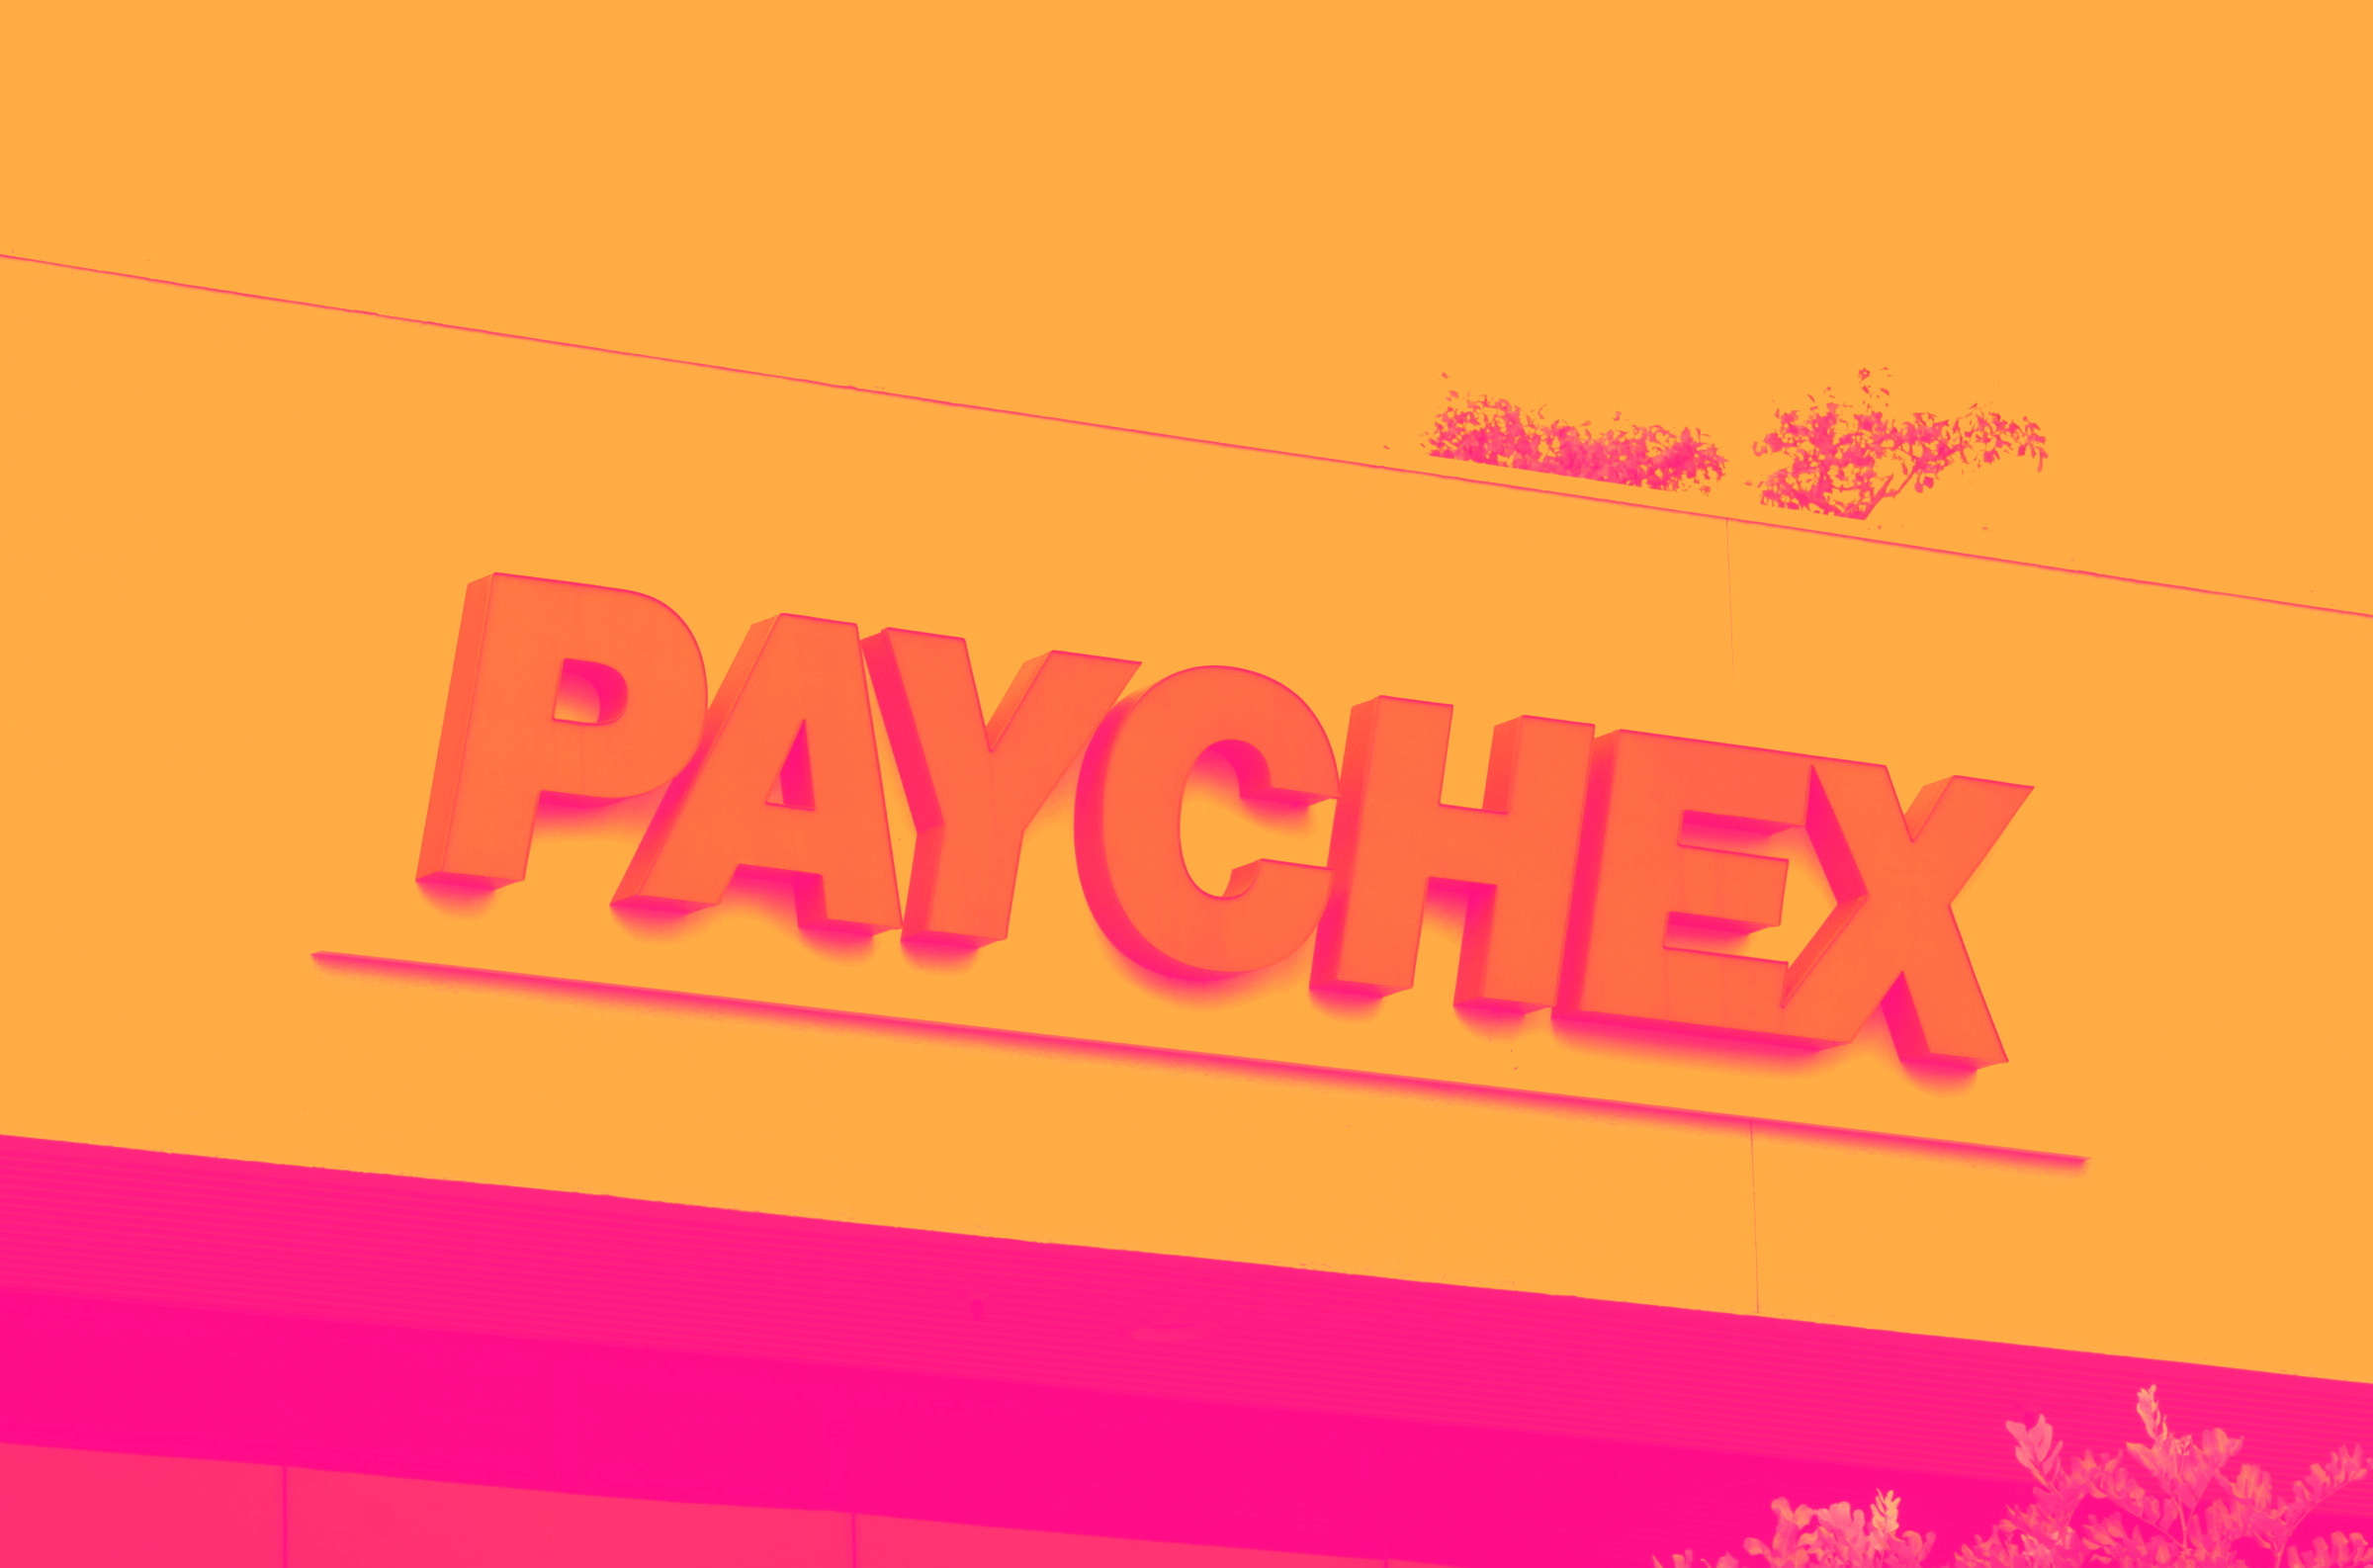 Paychex cover image ysd Jzsm